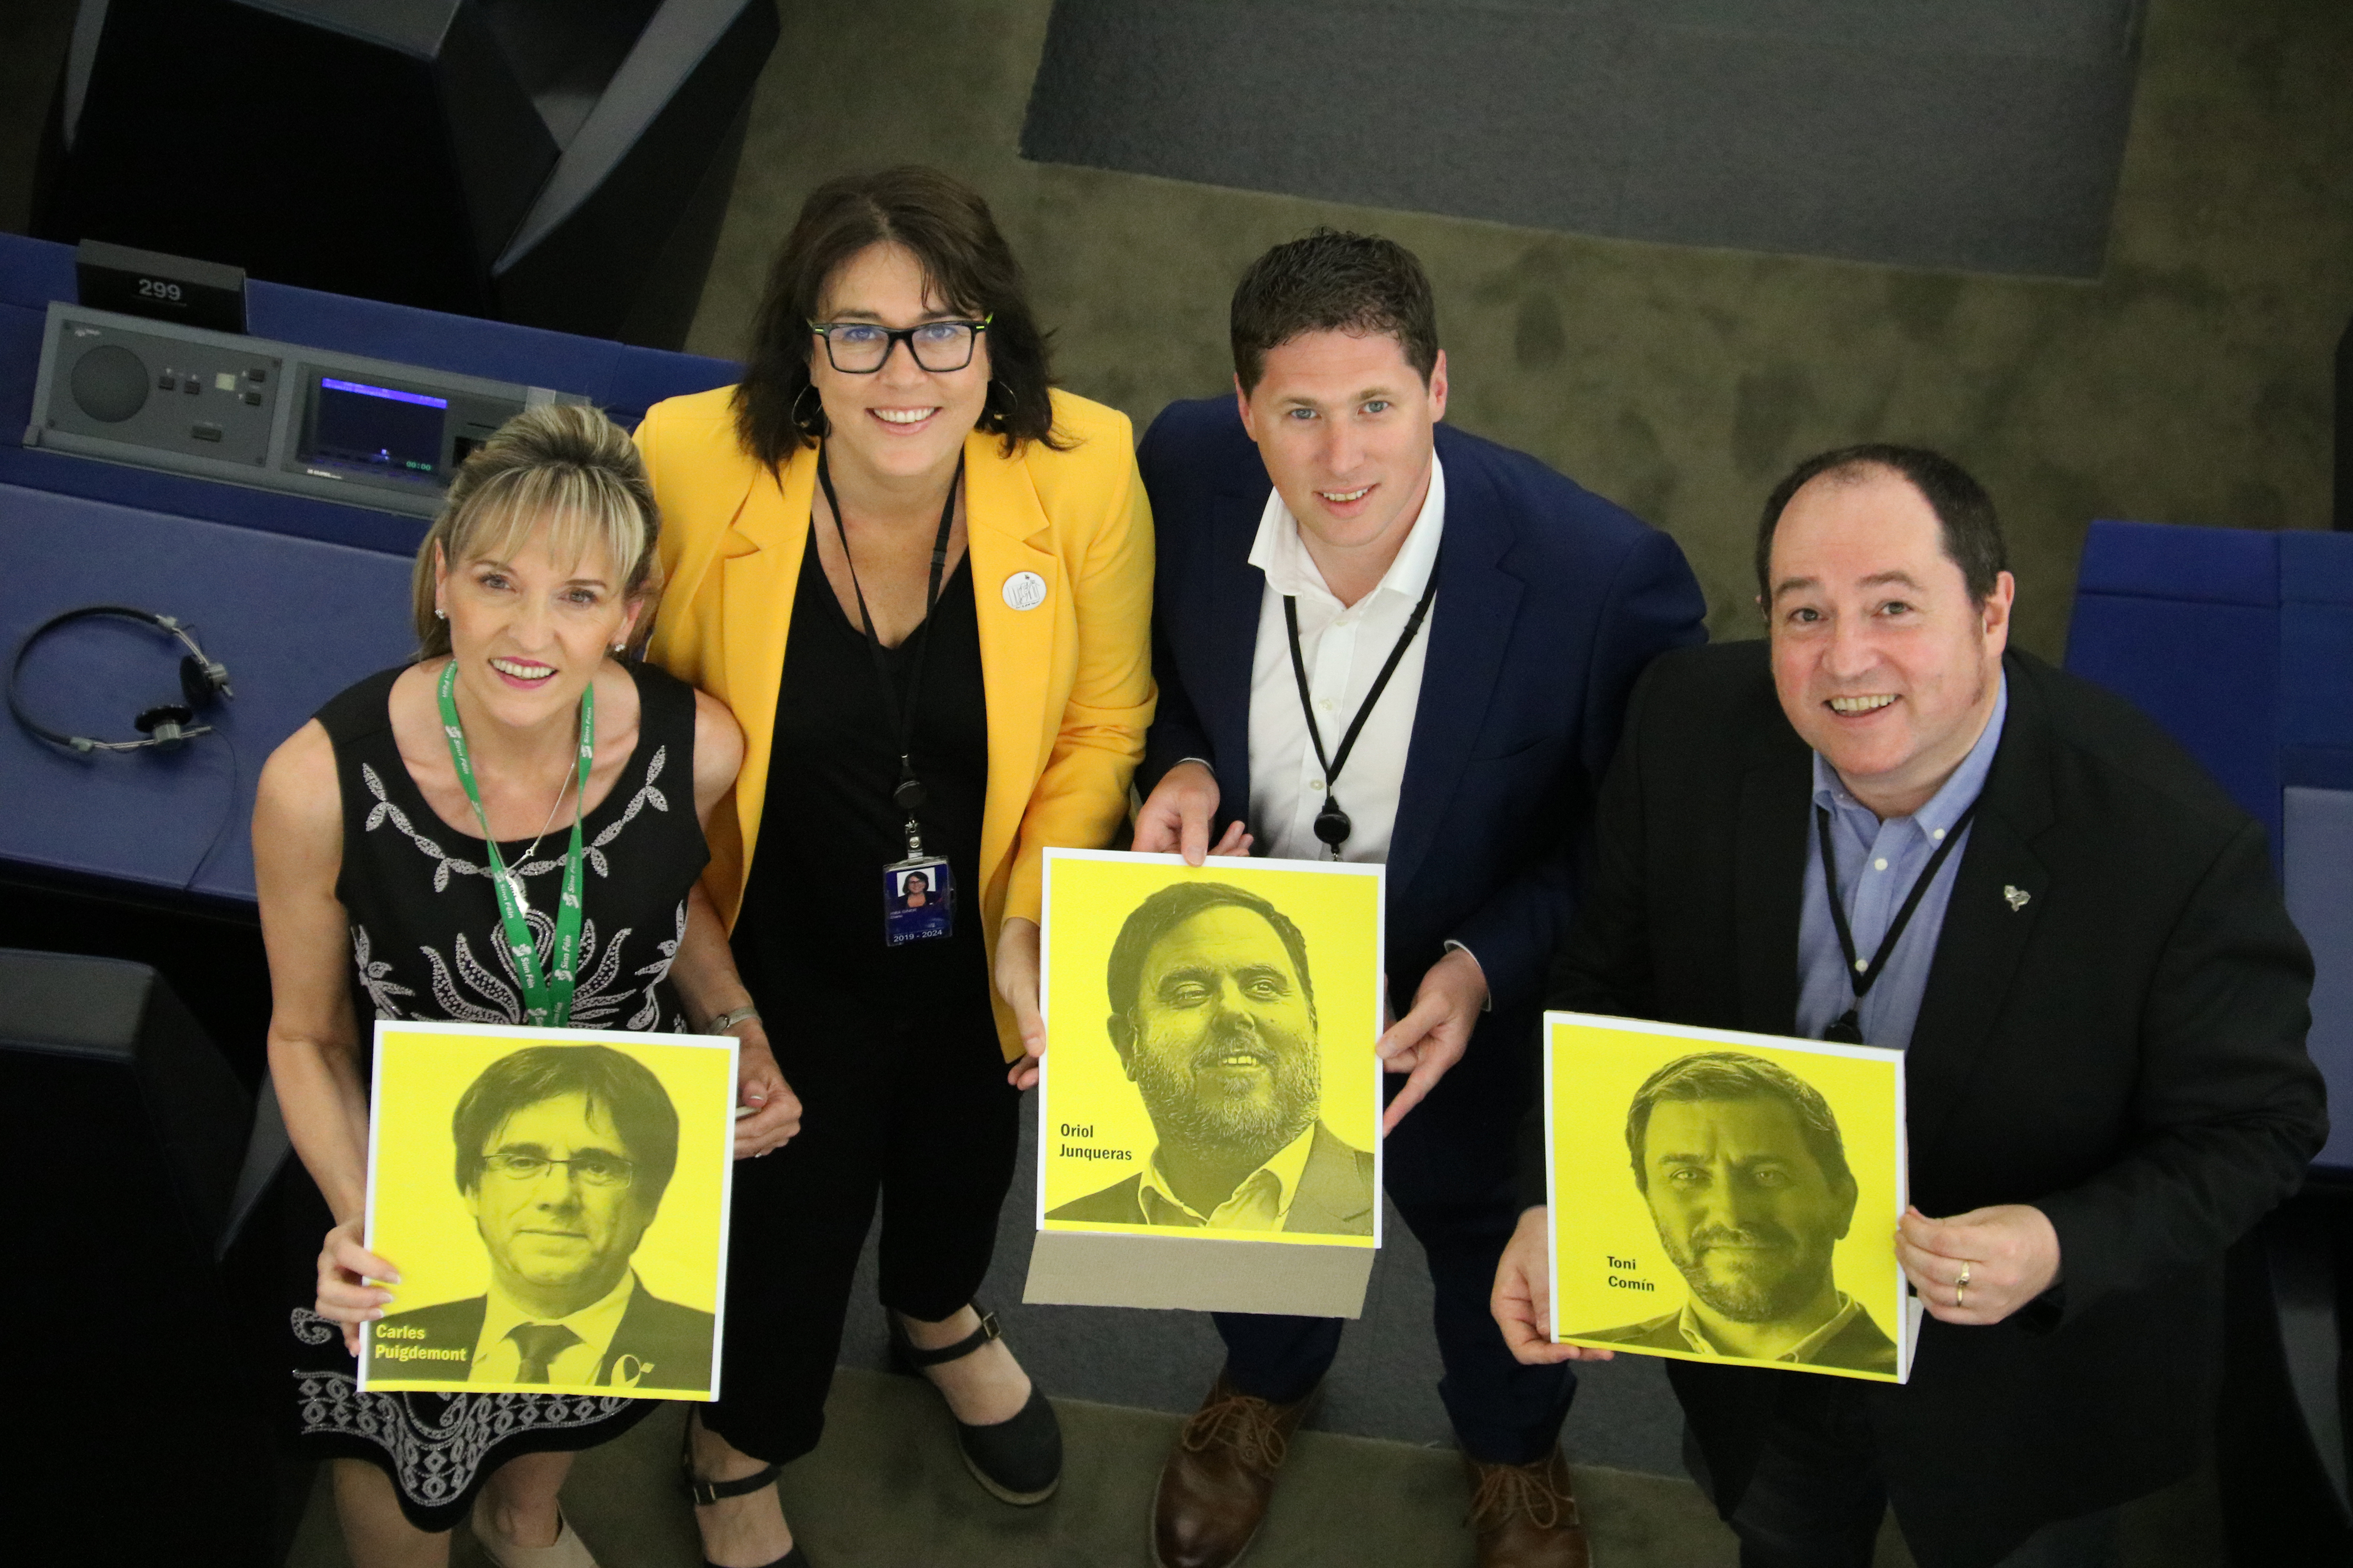 MEPs holding signs with the faces of Catalan leaders Carles Puigdemont, Oriol Junqueras, and Toni Comín (by ACN)